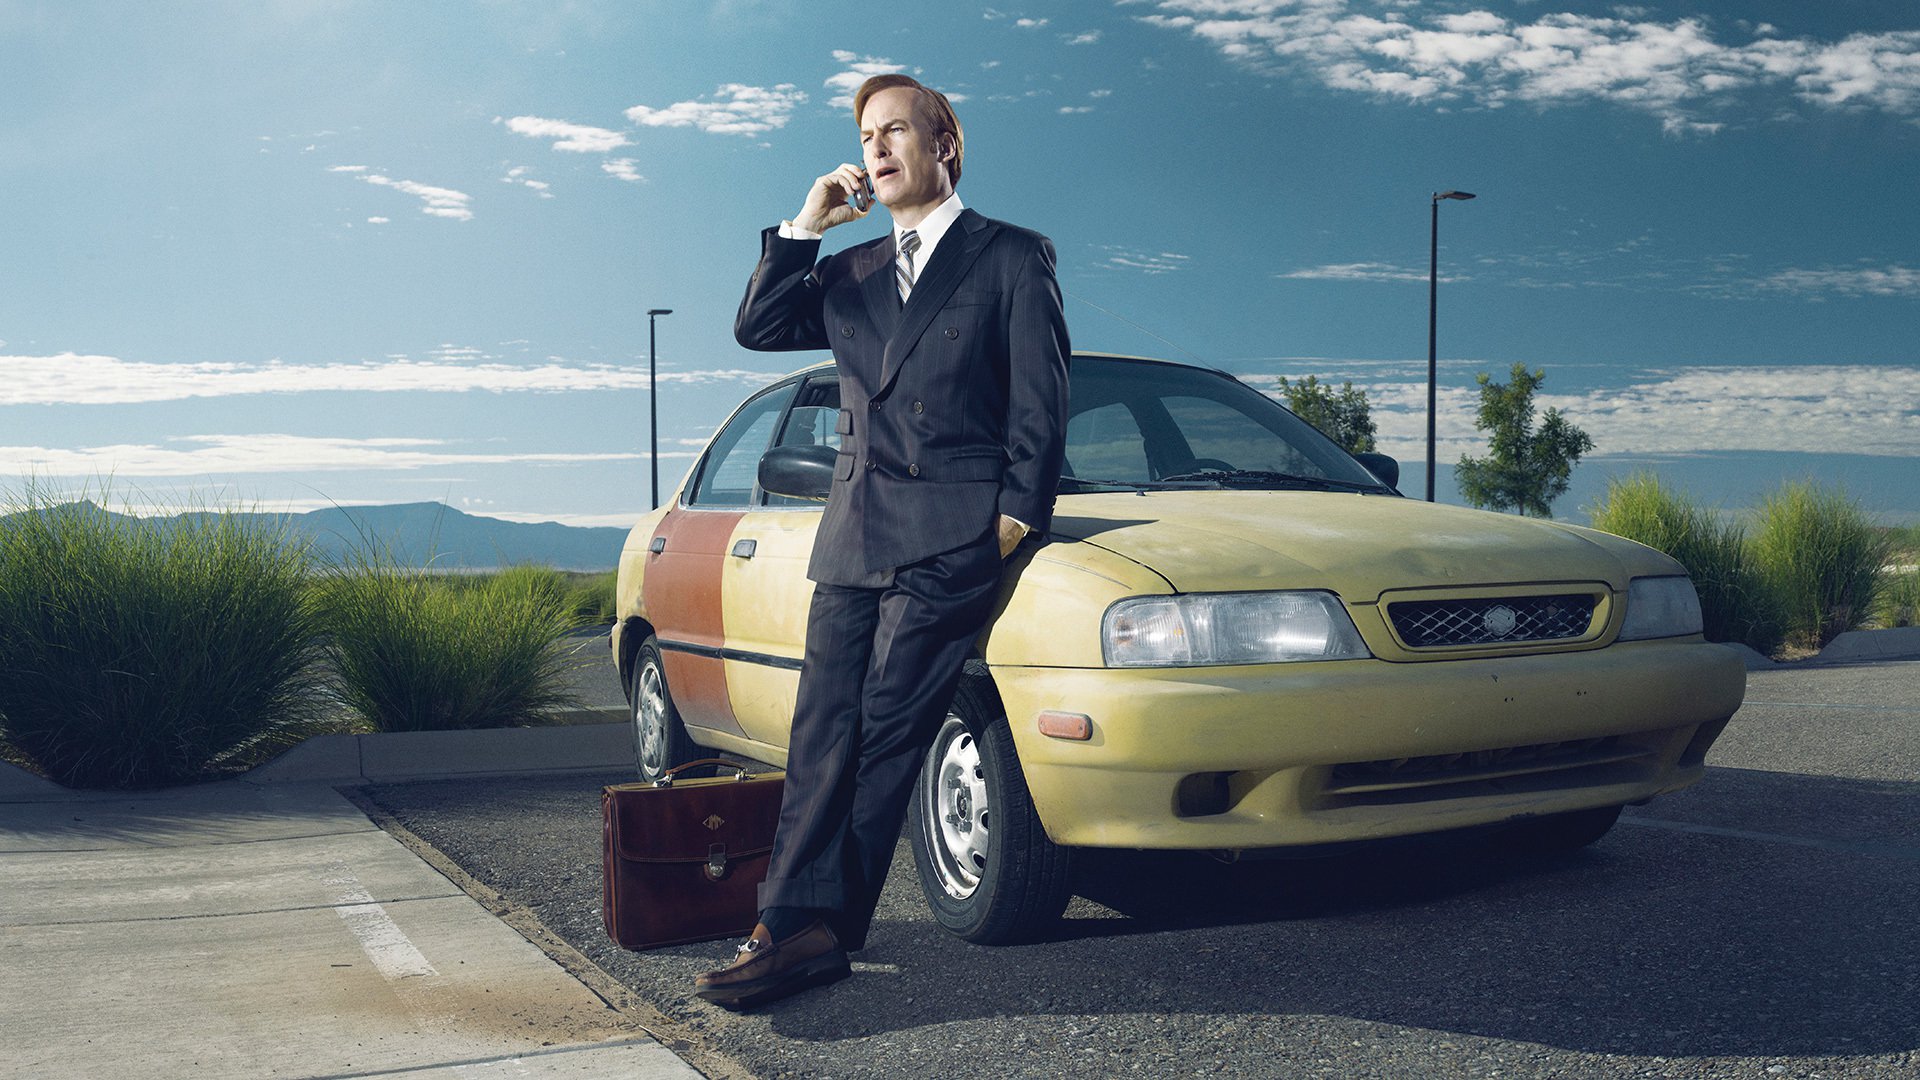  better call saul phone wallpaper  android  iphone hd wallpaper  background download HD Photos  Wallpapers 0 Images  Page 1